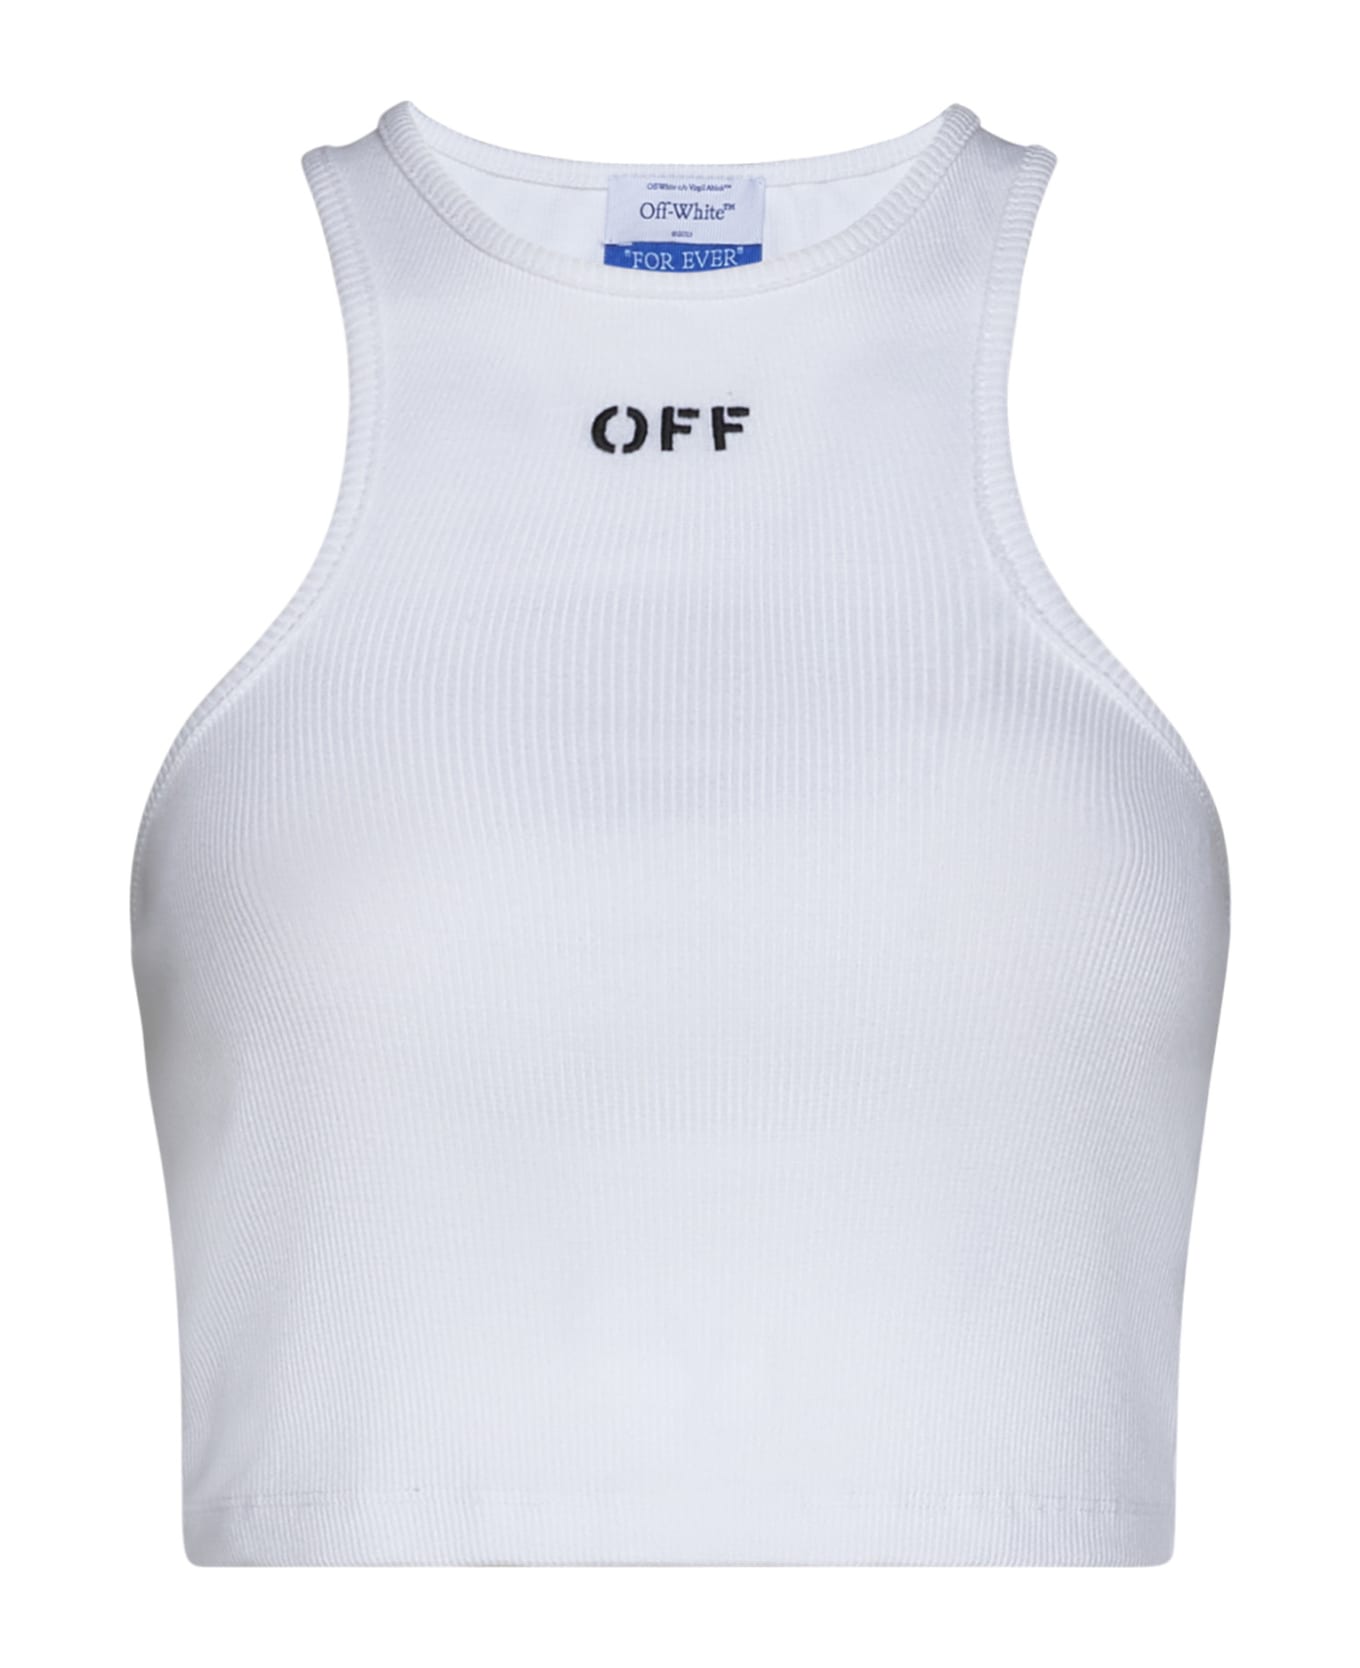 Off-White Off Stamp Rib Rowing Top - White